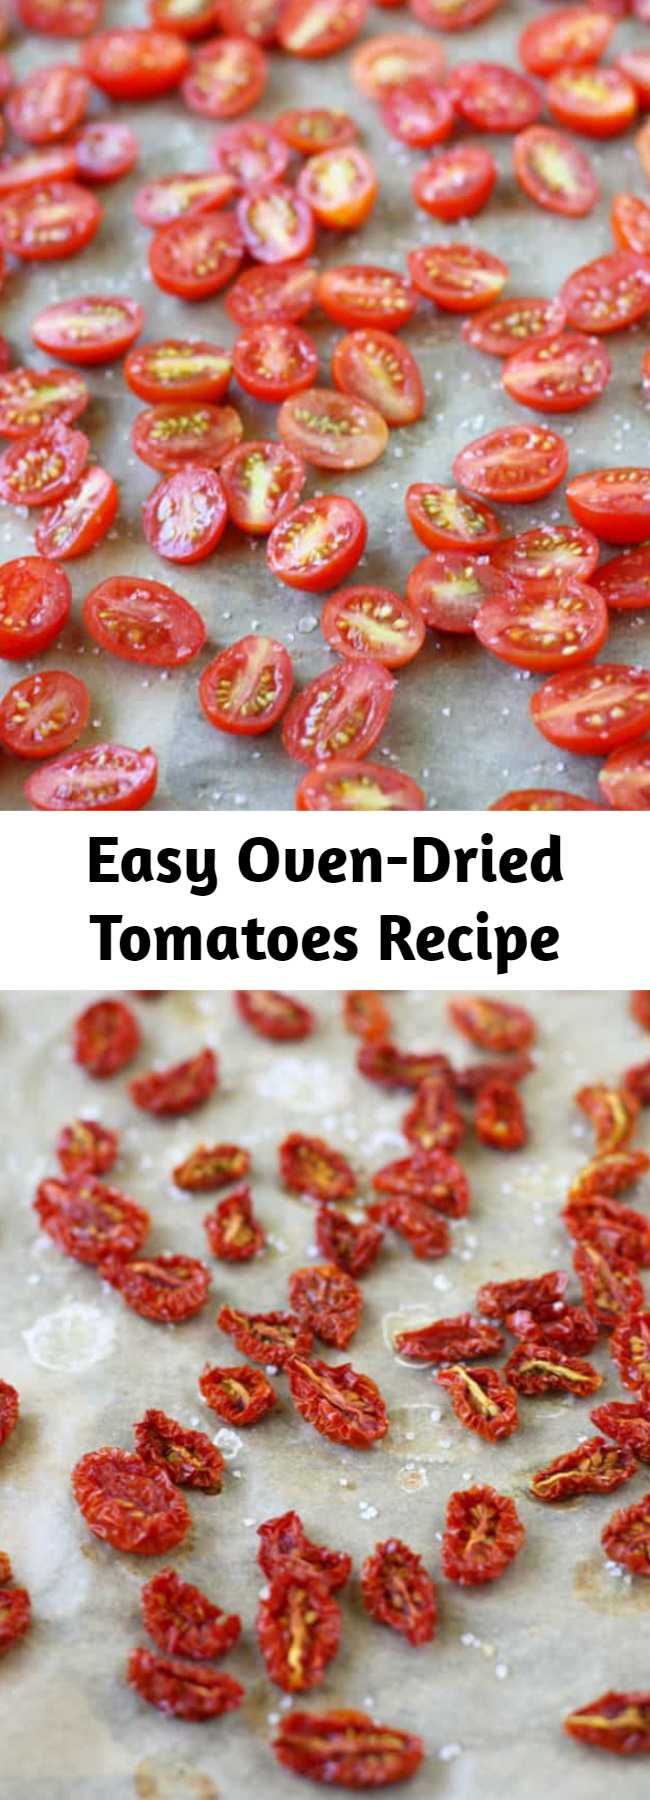 Easy Oven-Dried Tomatoes Recipe - It's so easy to make delicious oven-dried tomatoes at home! These little gems are bursting with sun-kissed garden flavor!